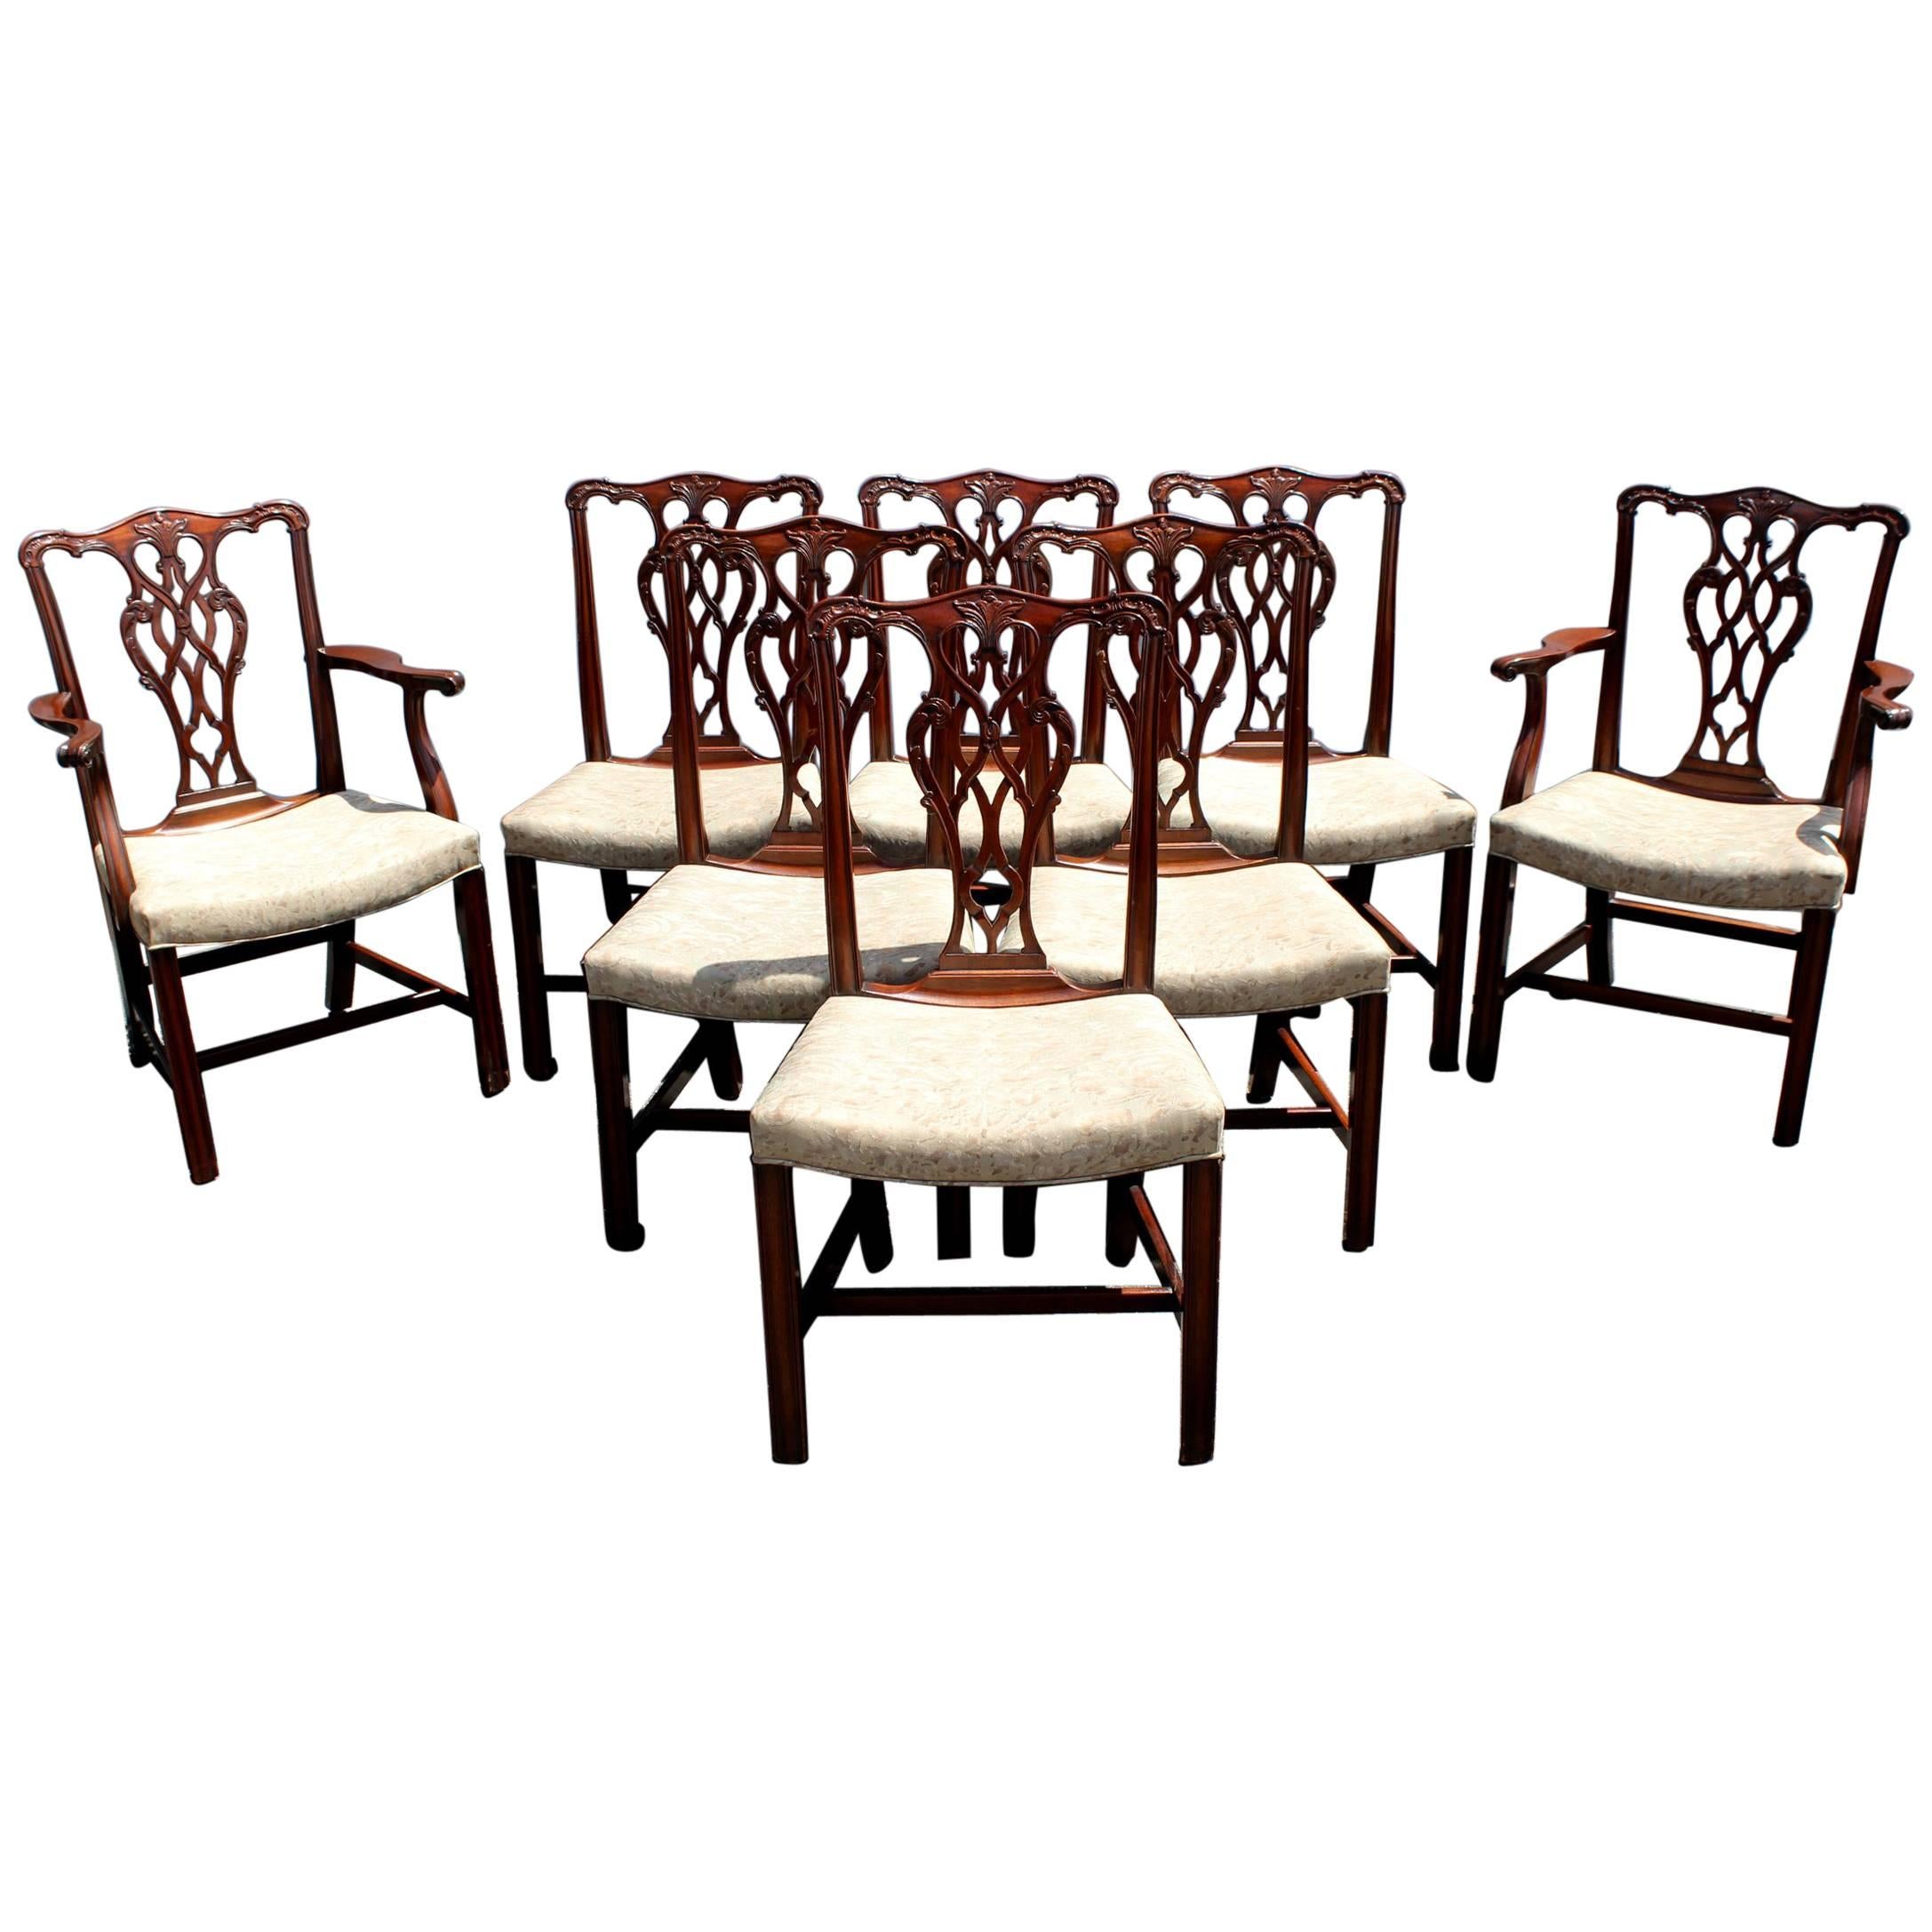 Set of Eight Mahogany Foliate Carved Chippendale Style Dining Chairs